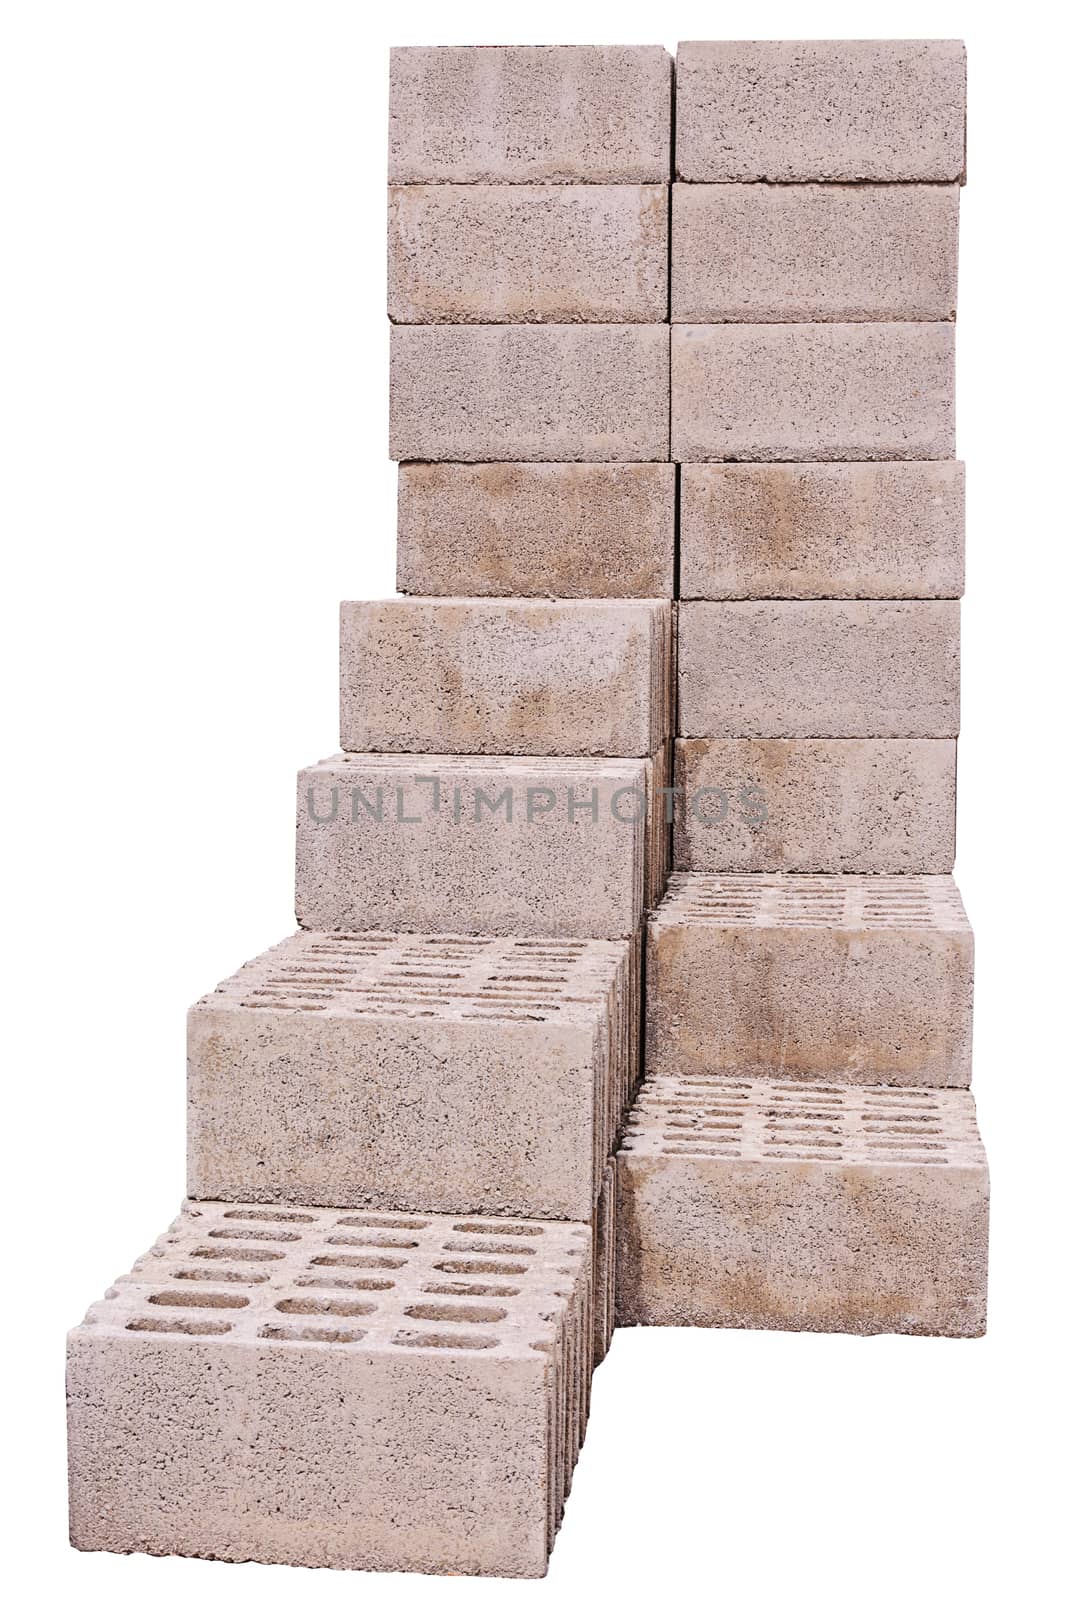 Concrete block construction material isolated on white